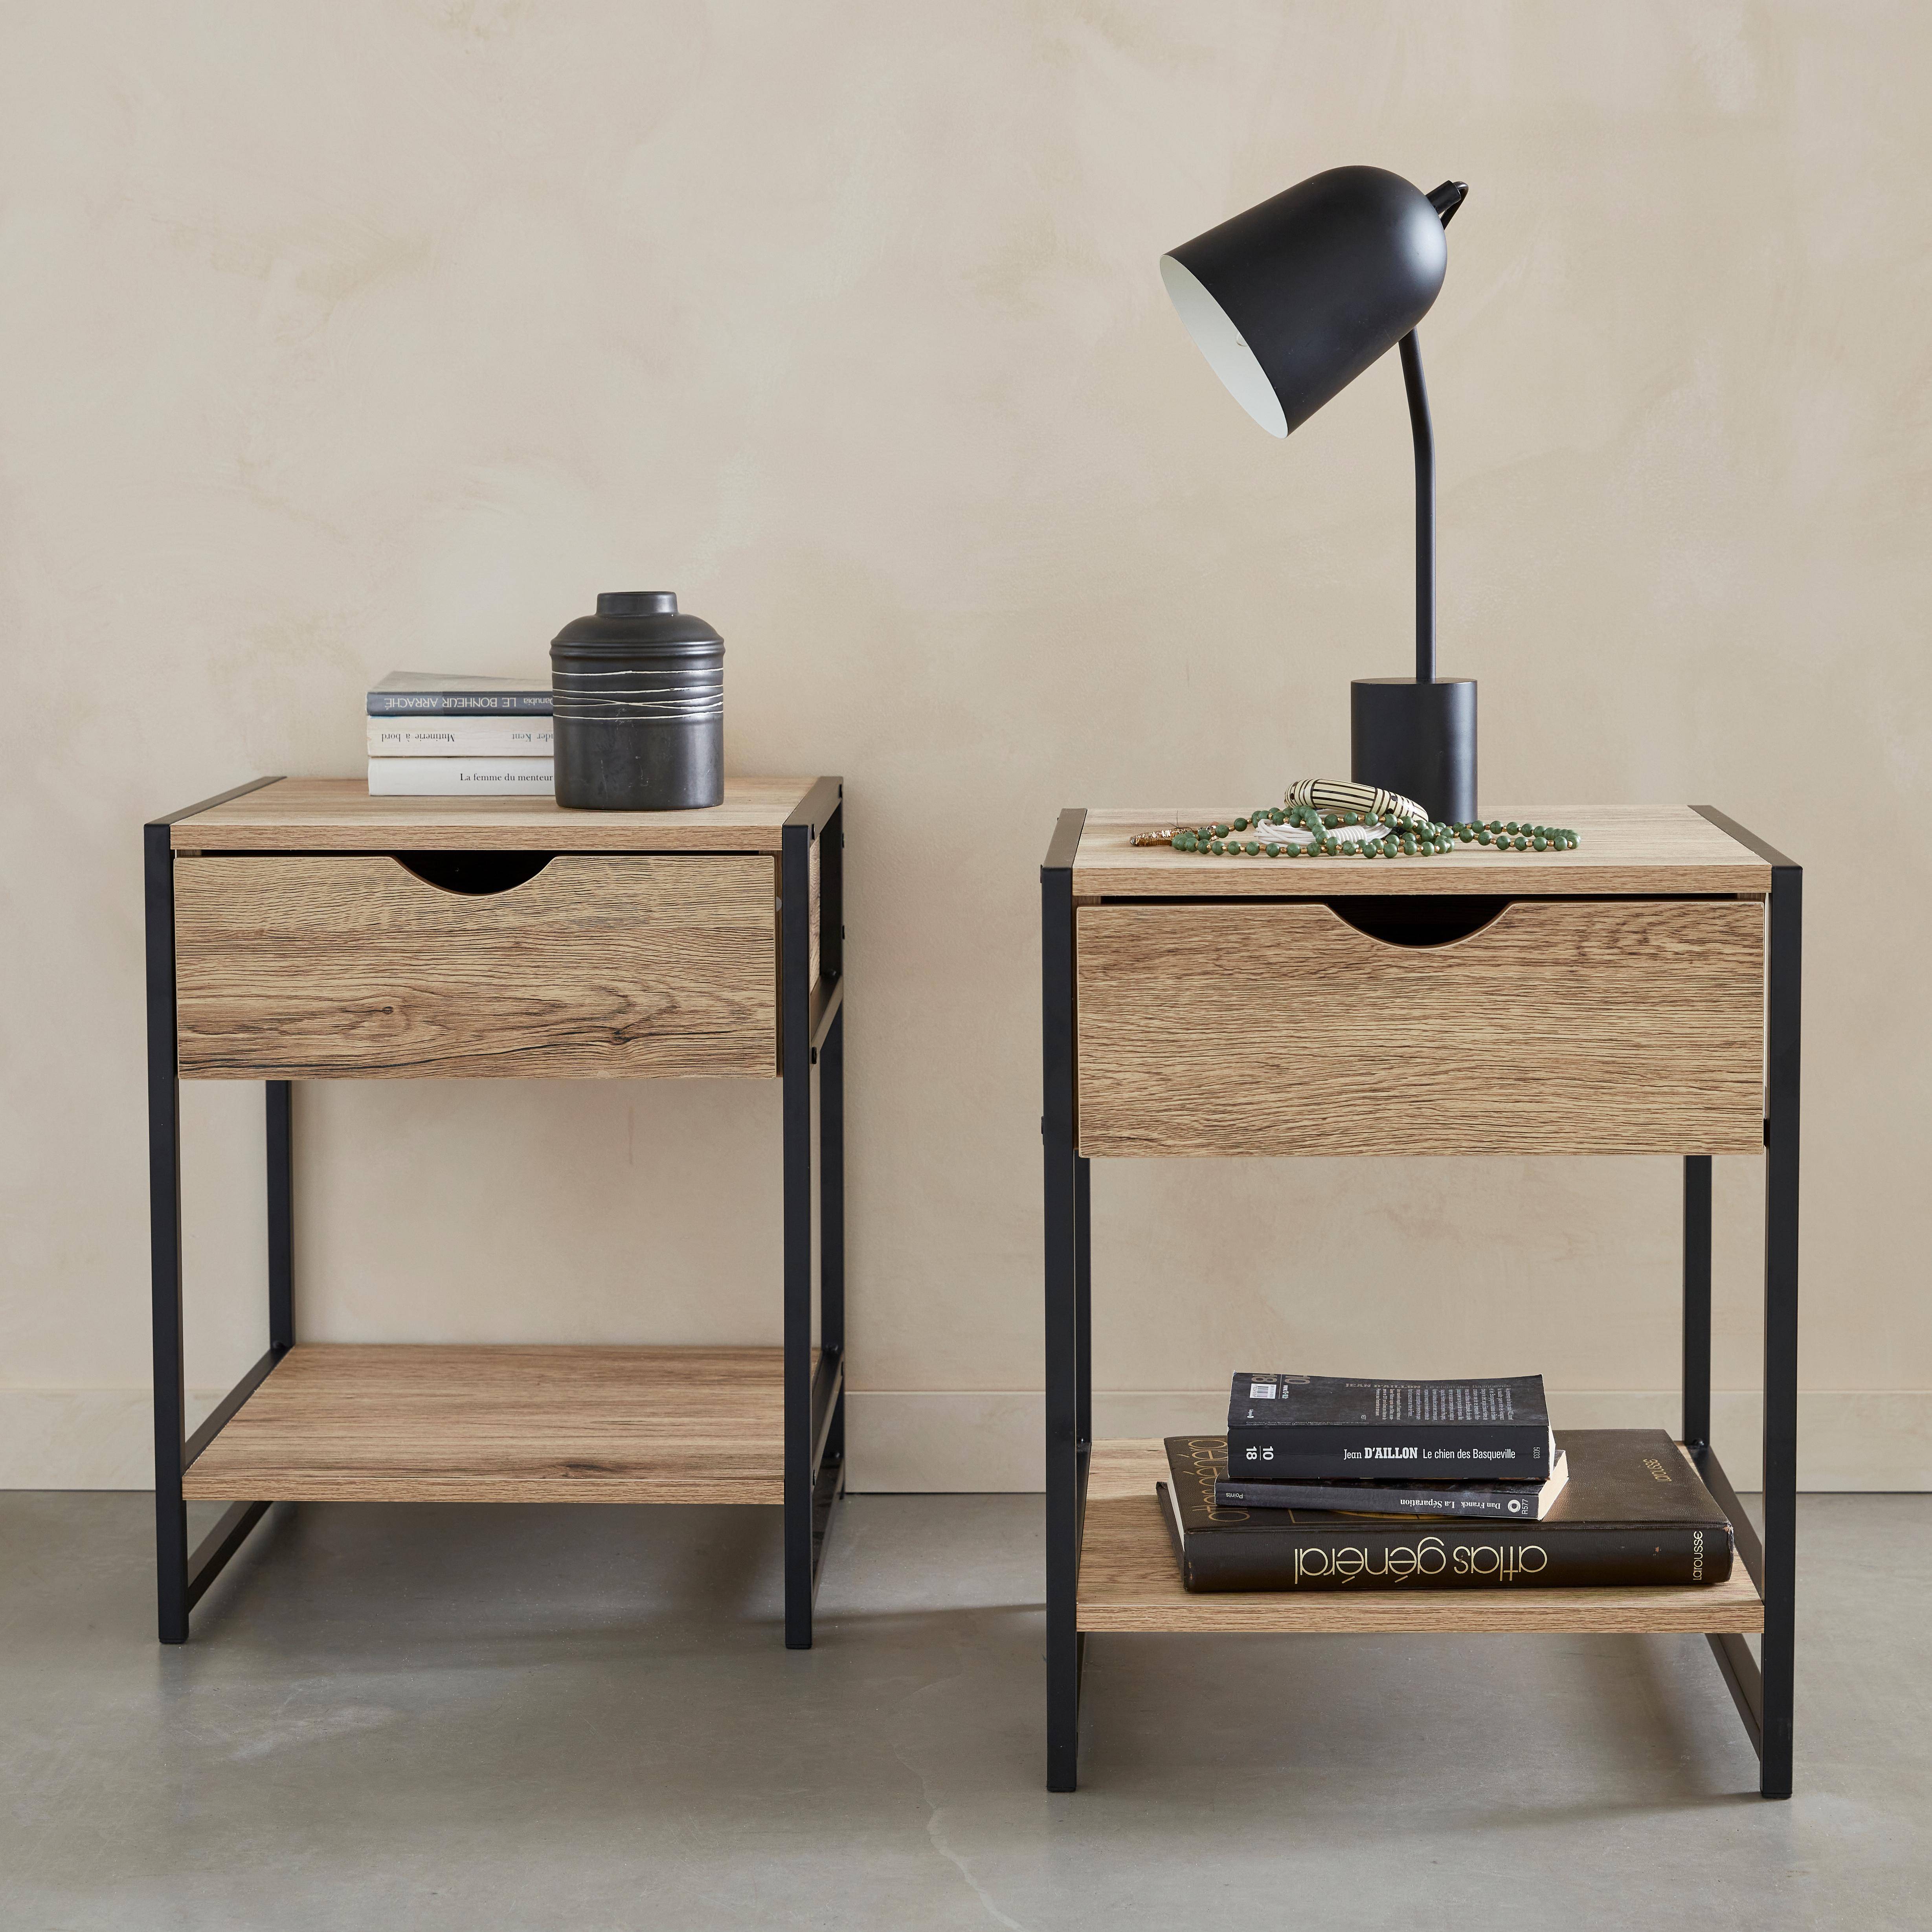 Pair of metal and wood-effect bedside tables with drawer and shelf, 40x40x50cm - Loft,sweeek,Photo1